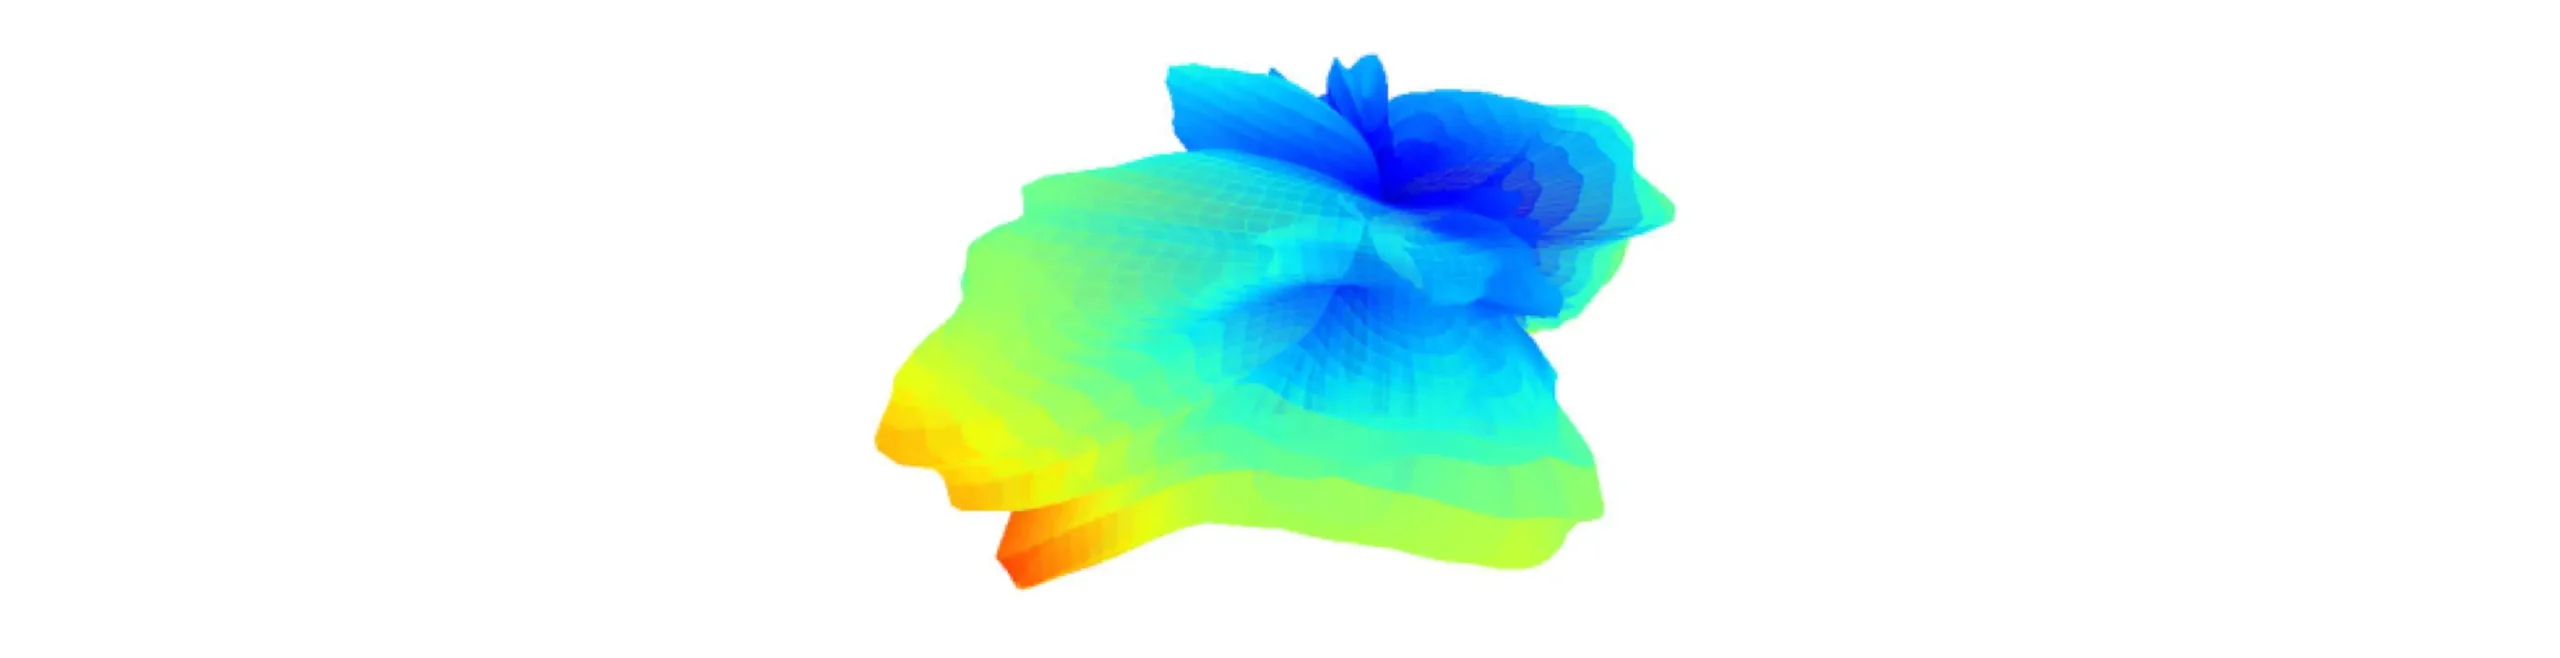 3D Gain plot used to visualize the combination of antenna directivity and efficiency.